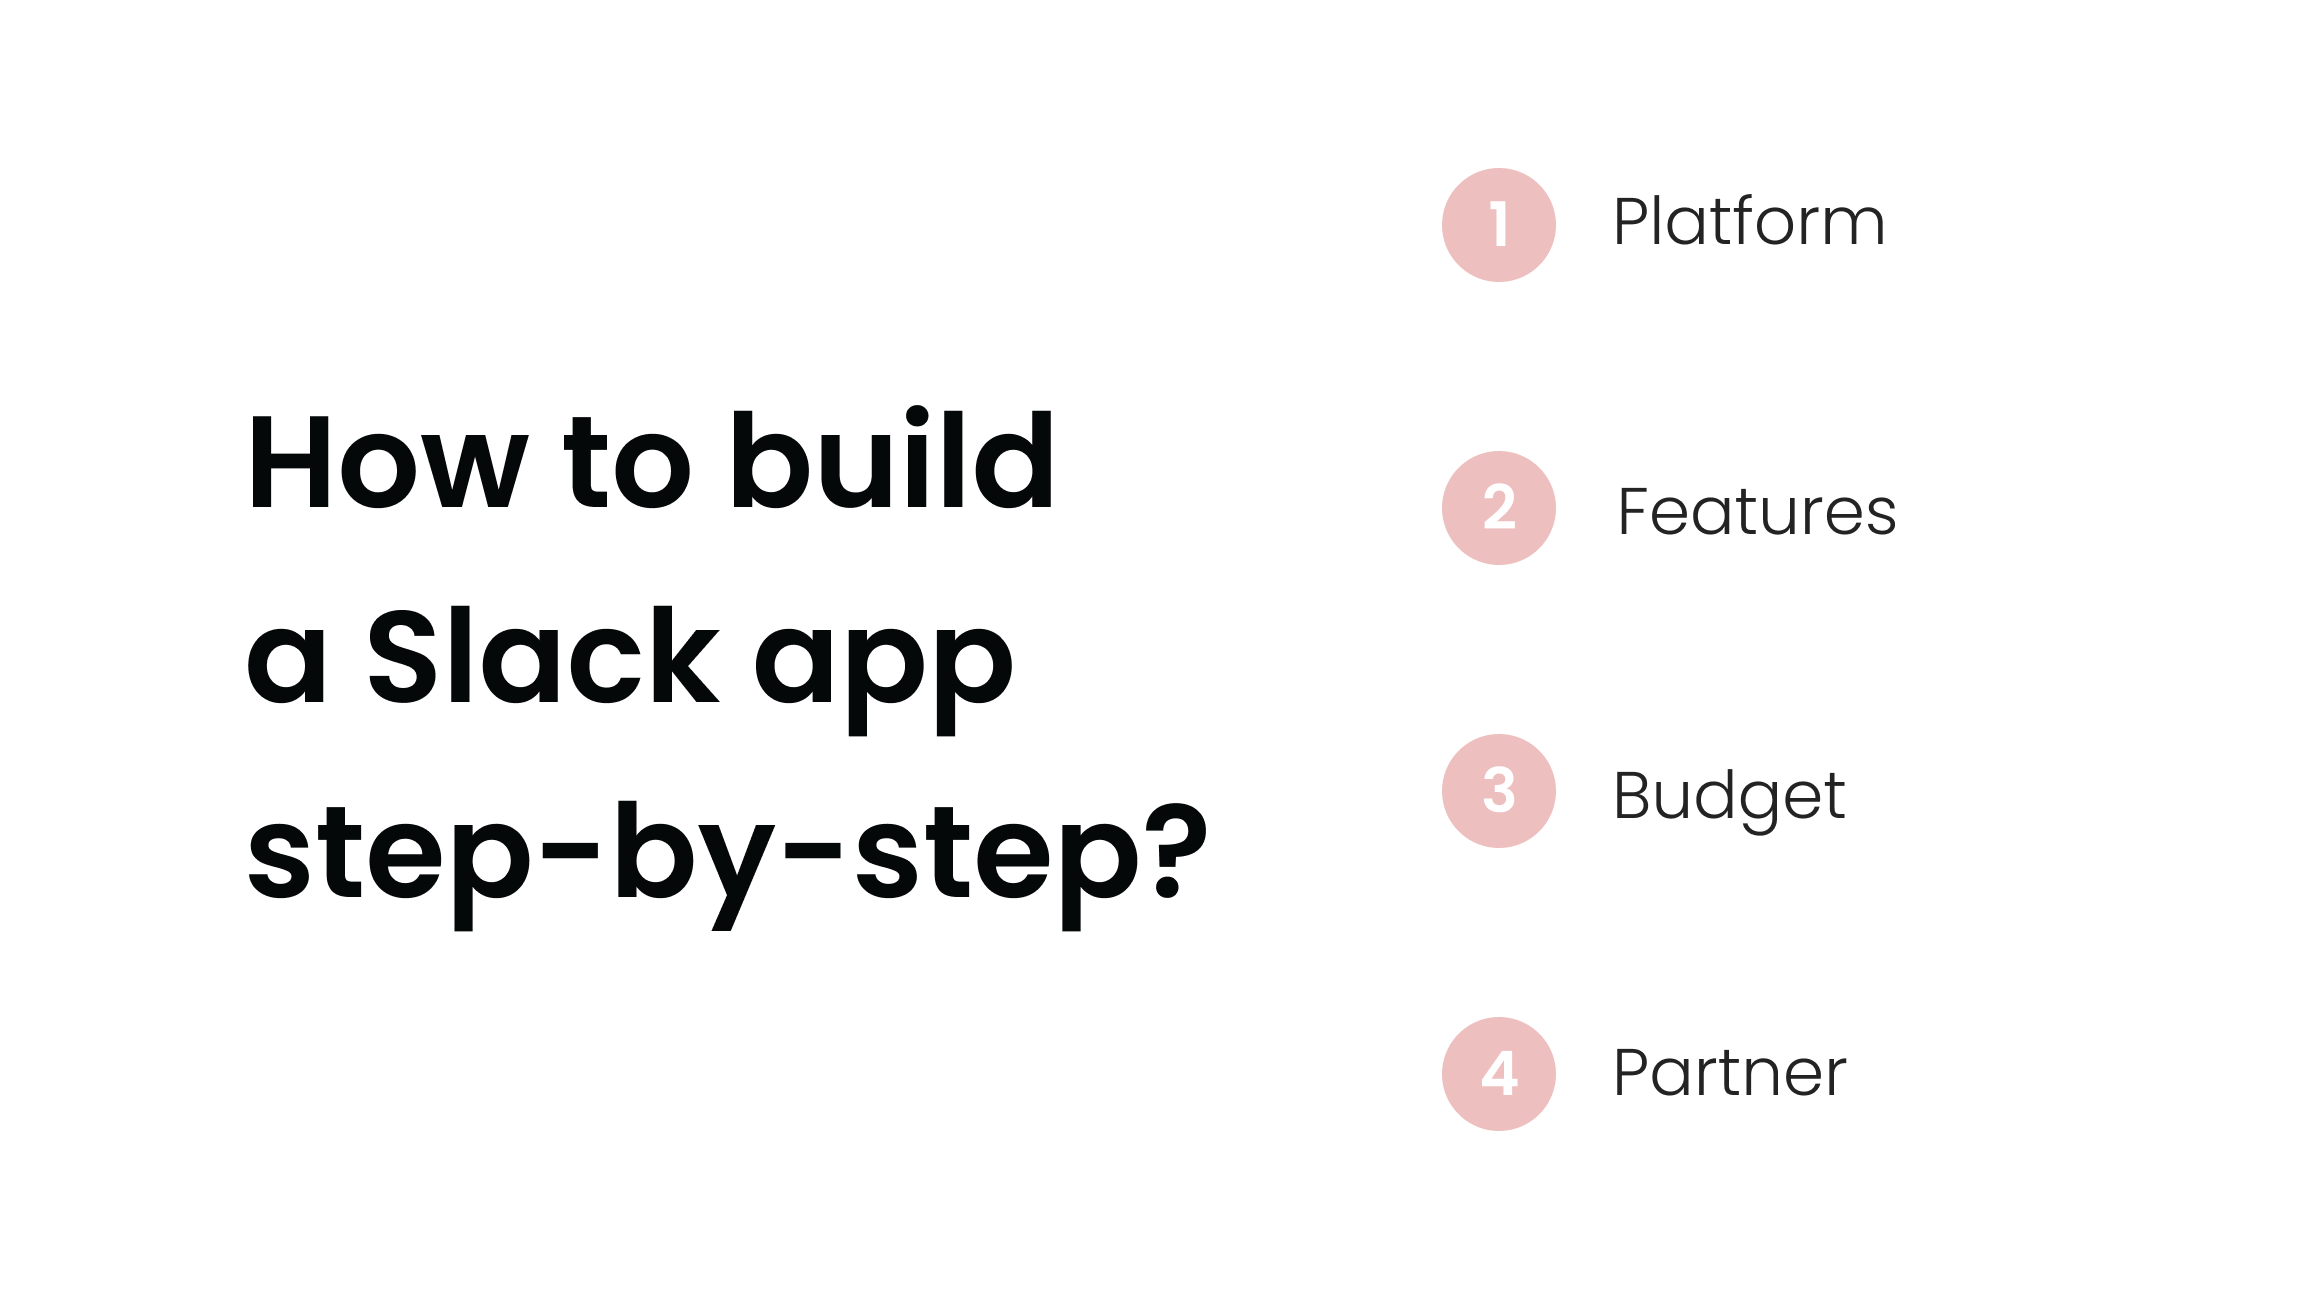 How to build a Slack app step-by-step
